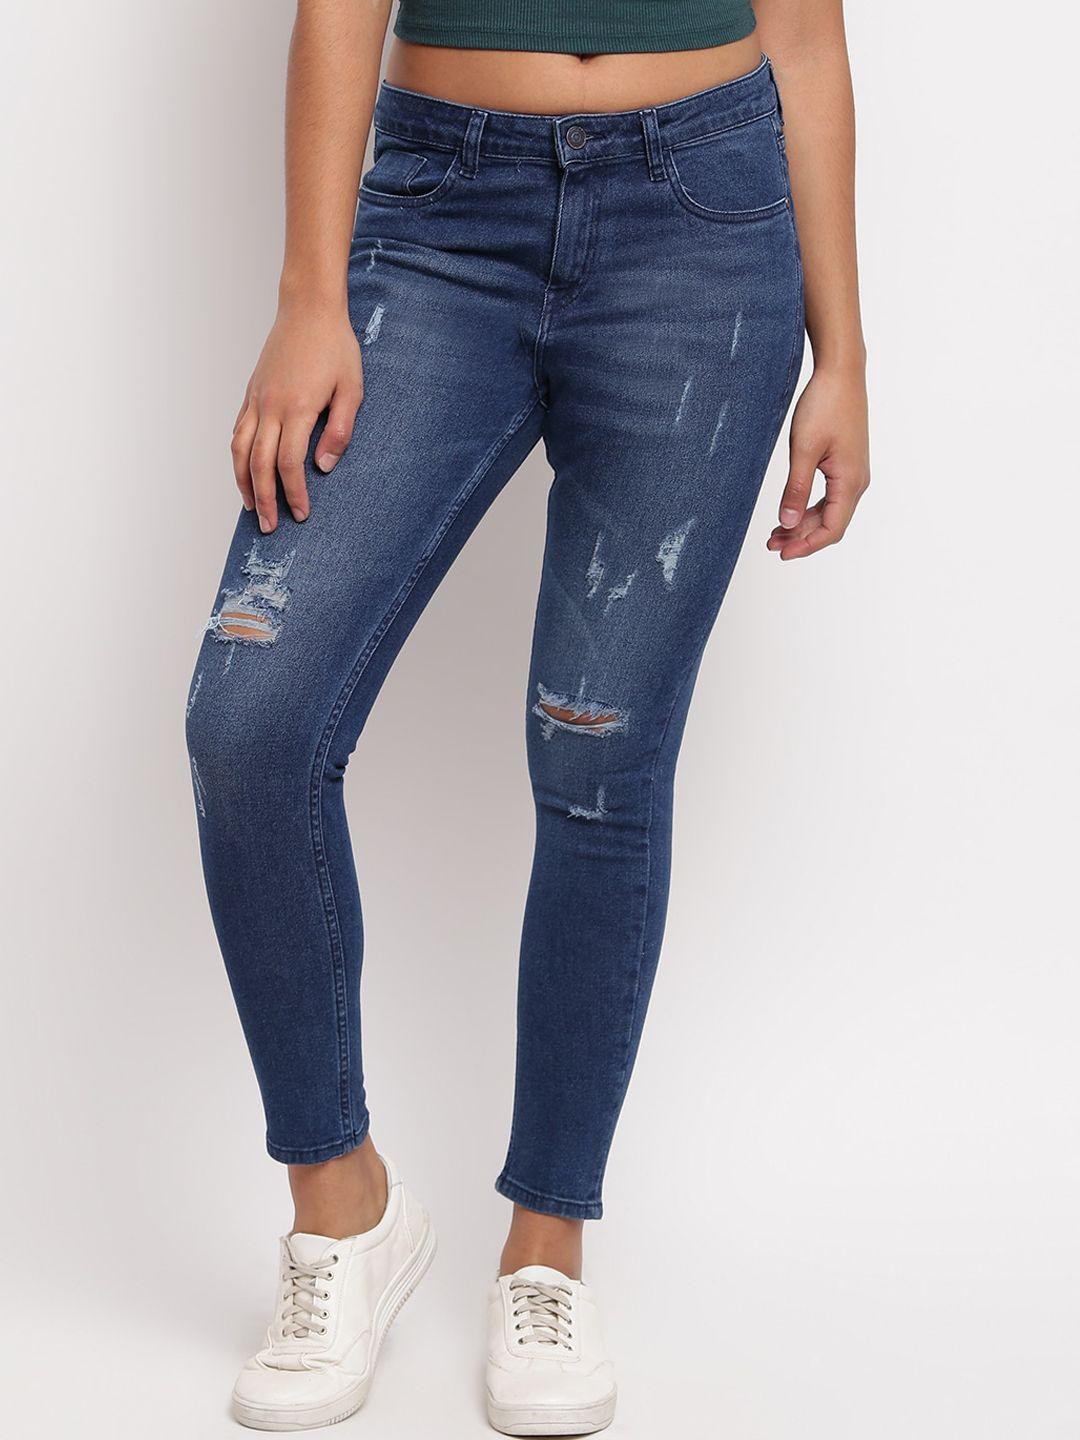 tales-&-stories-women-blue-skinny-fit-highly-distressed-stretchable-jeans